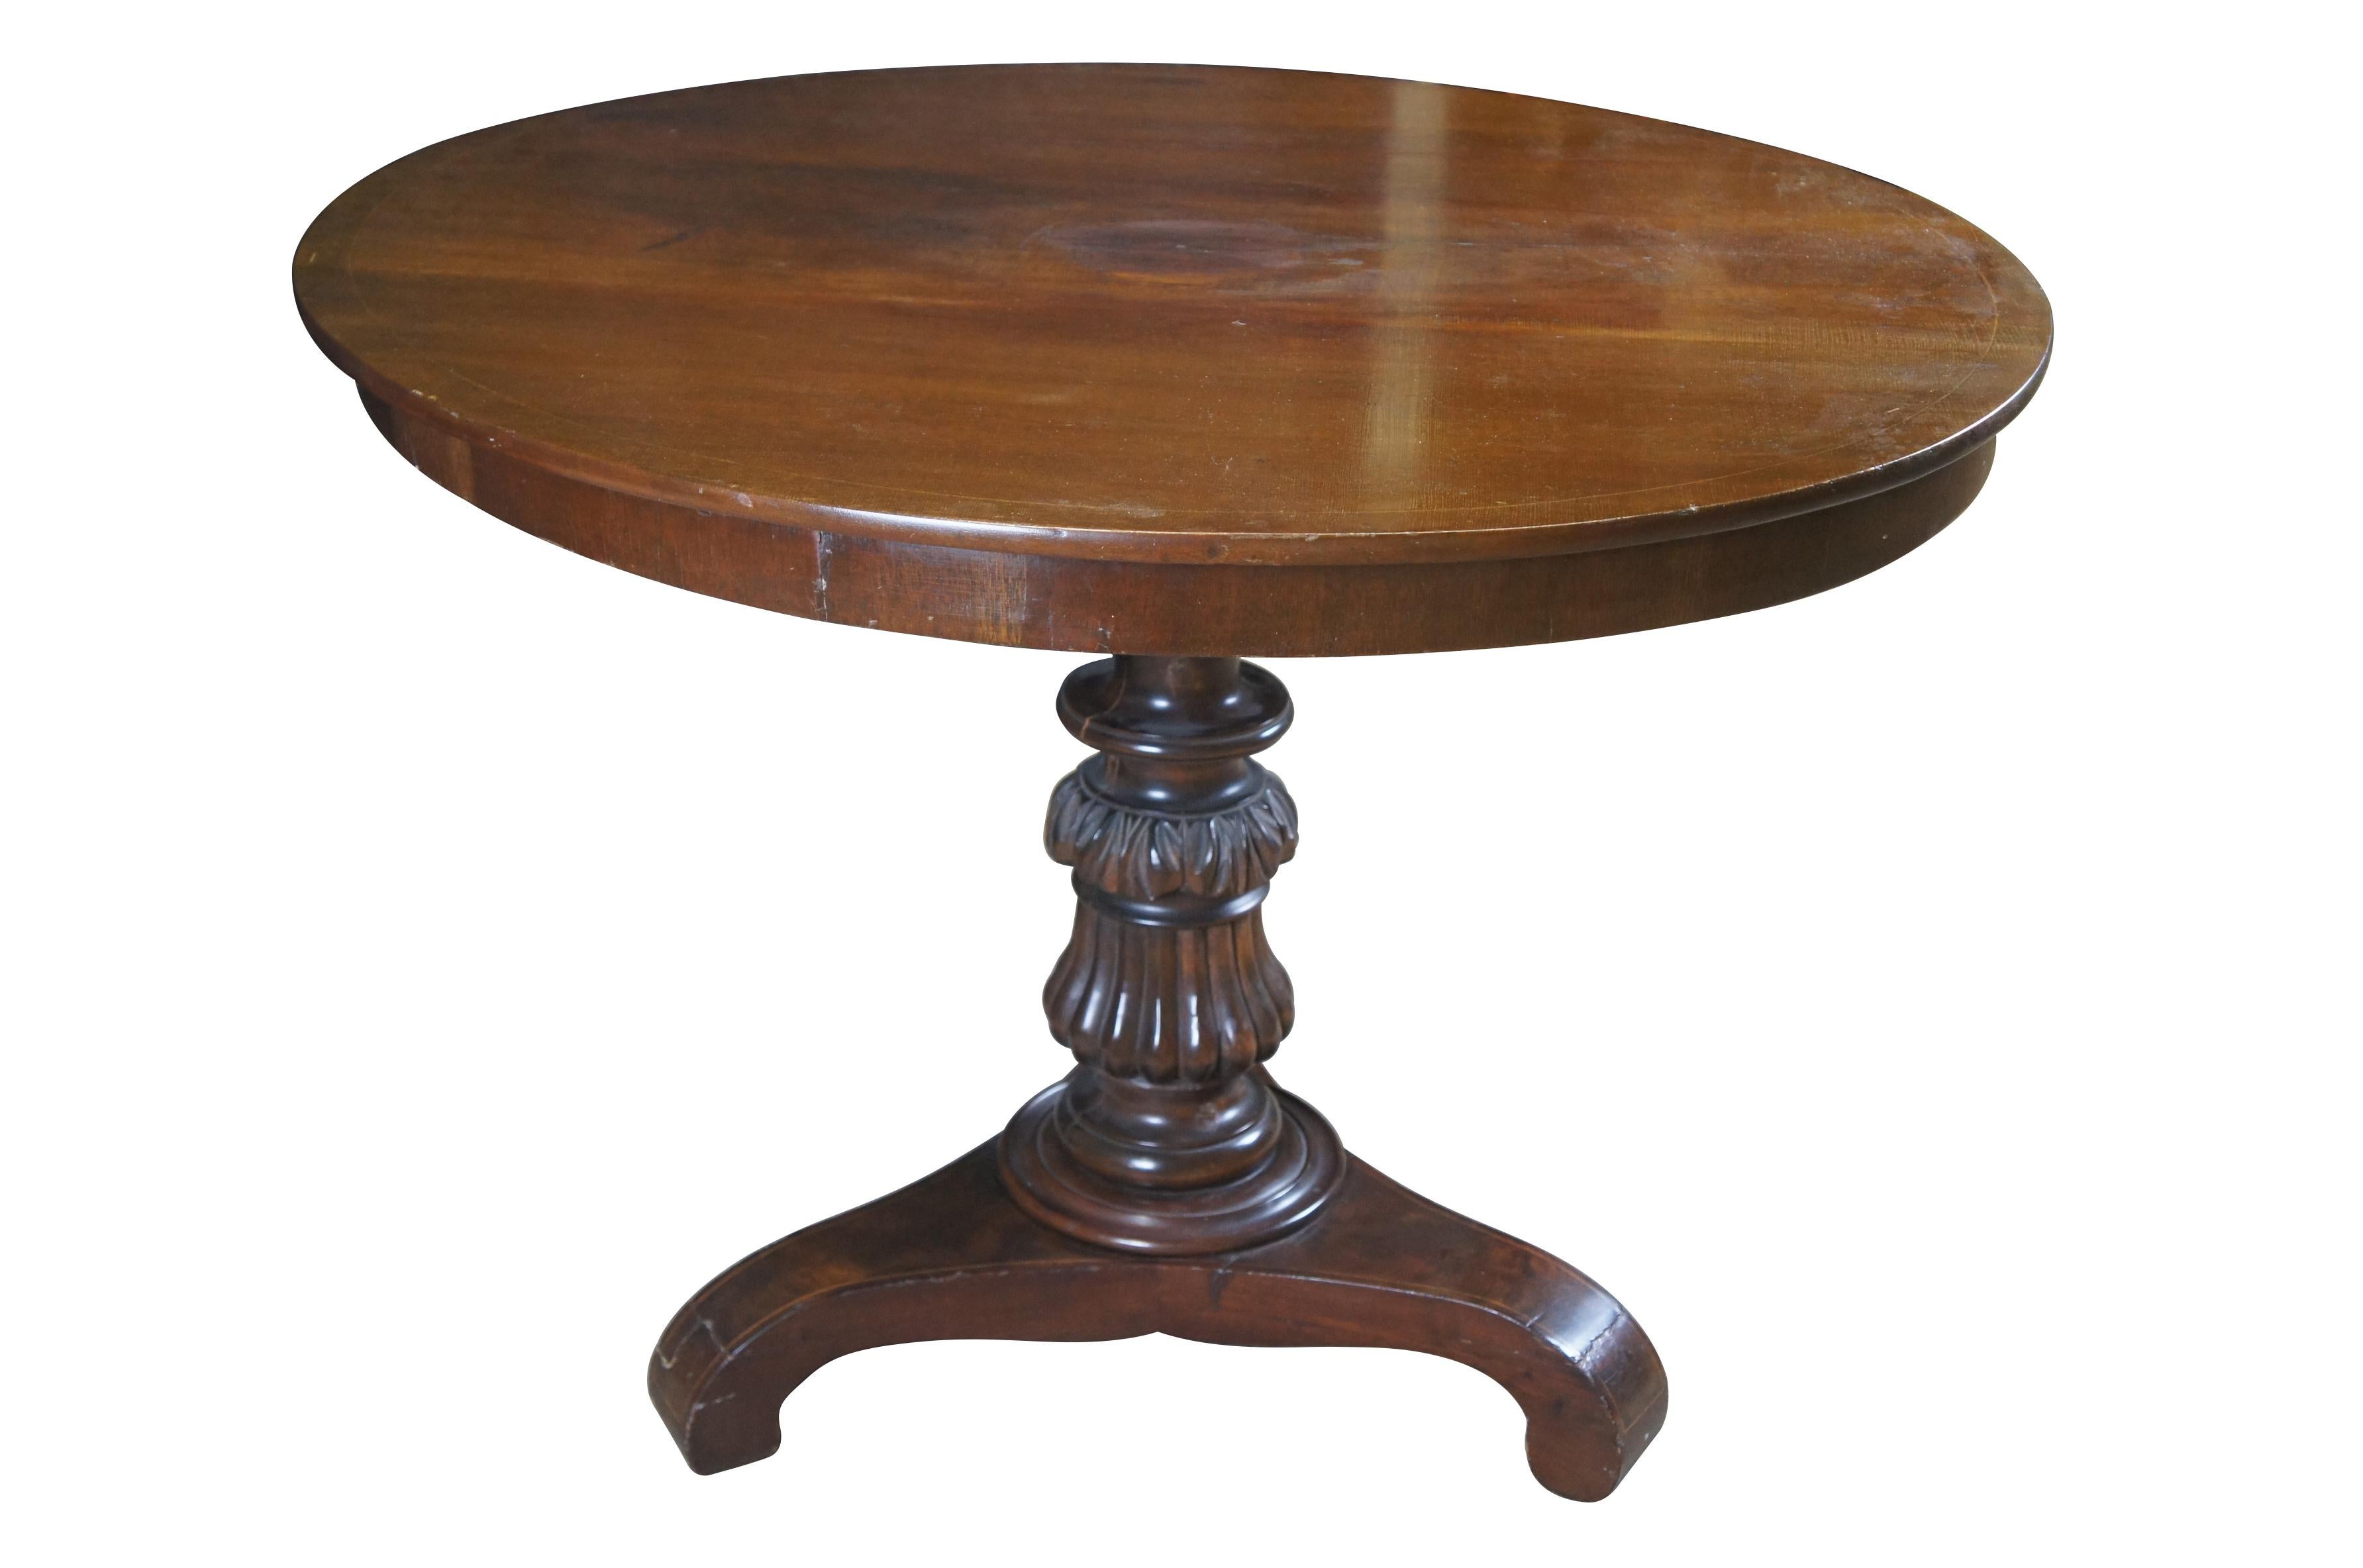 Antique early 19th century German Biedermeier period mahogany centre  / breakfast table featuring round form with inlaid fruitwood design supported by a turned and carved column on triangular base.  Circa 1830s.

From 1815-1848, Northern European